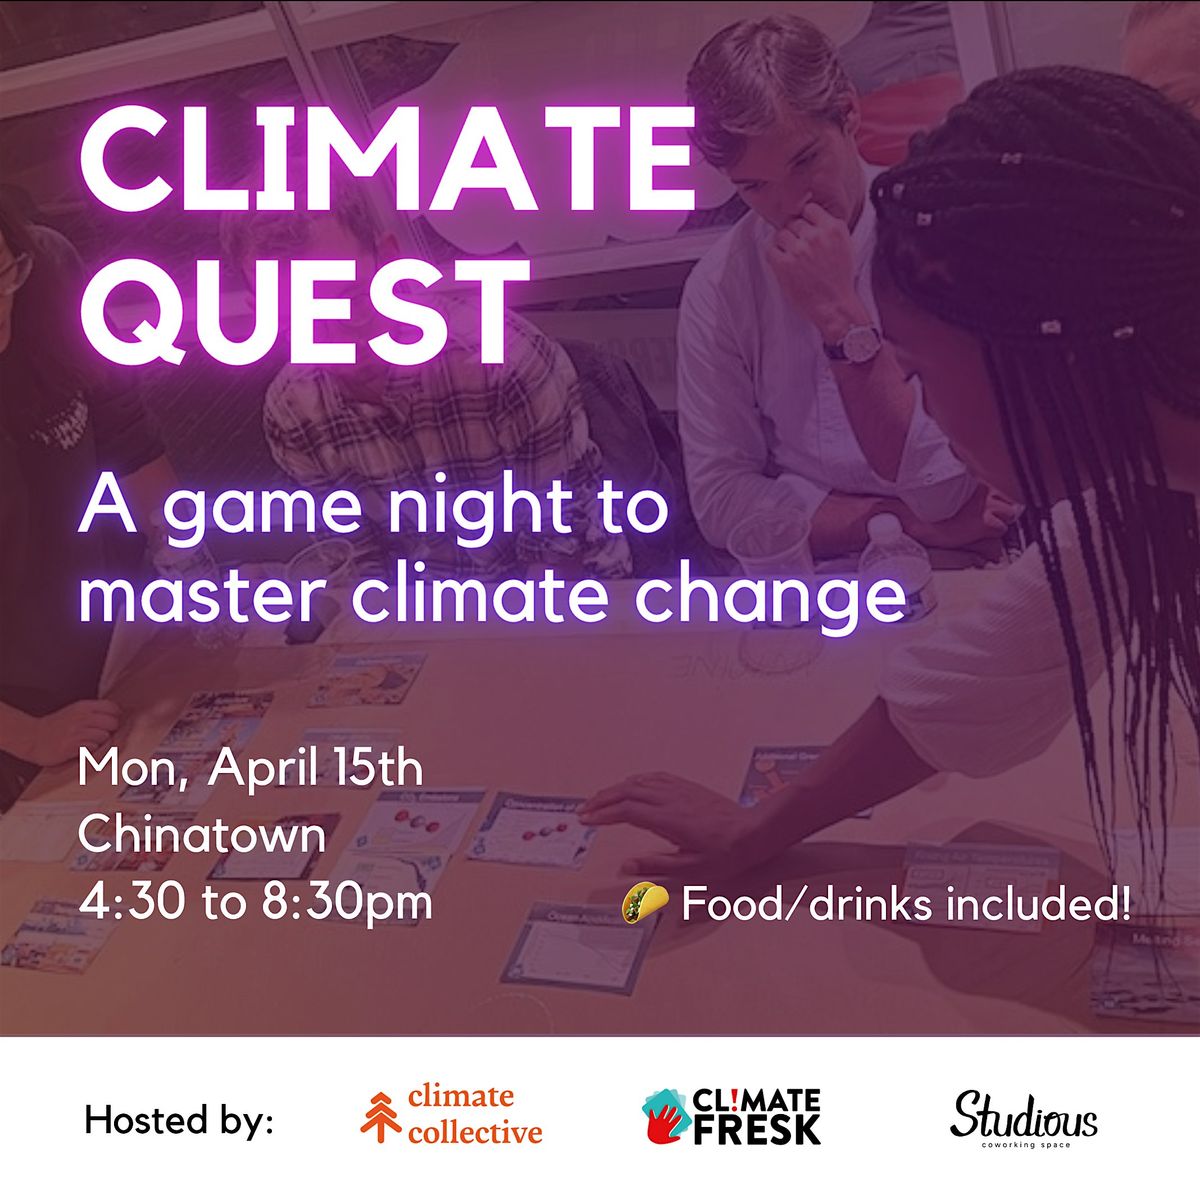 Climate Quest - A Game Night to Master Climate Change